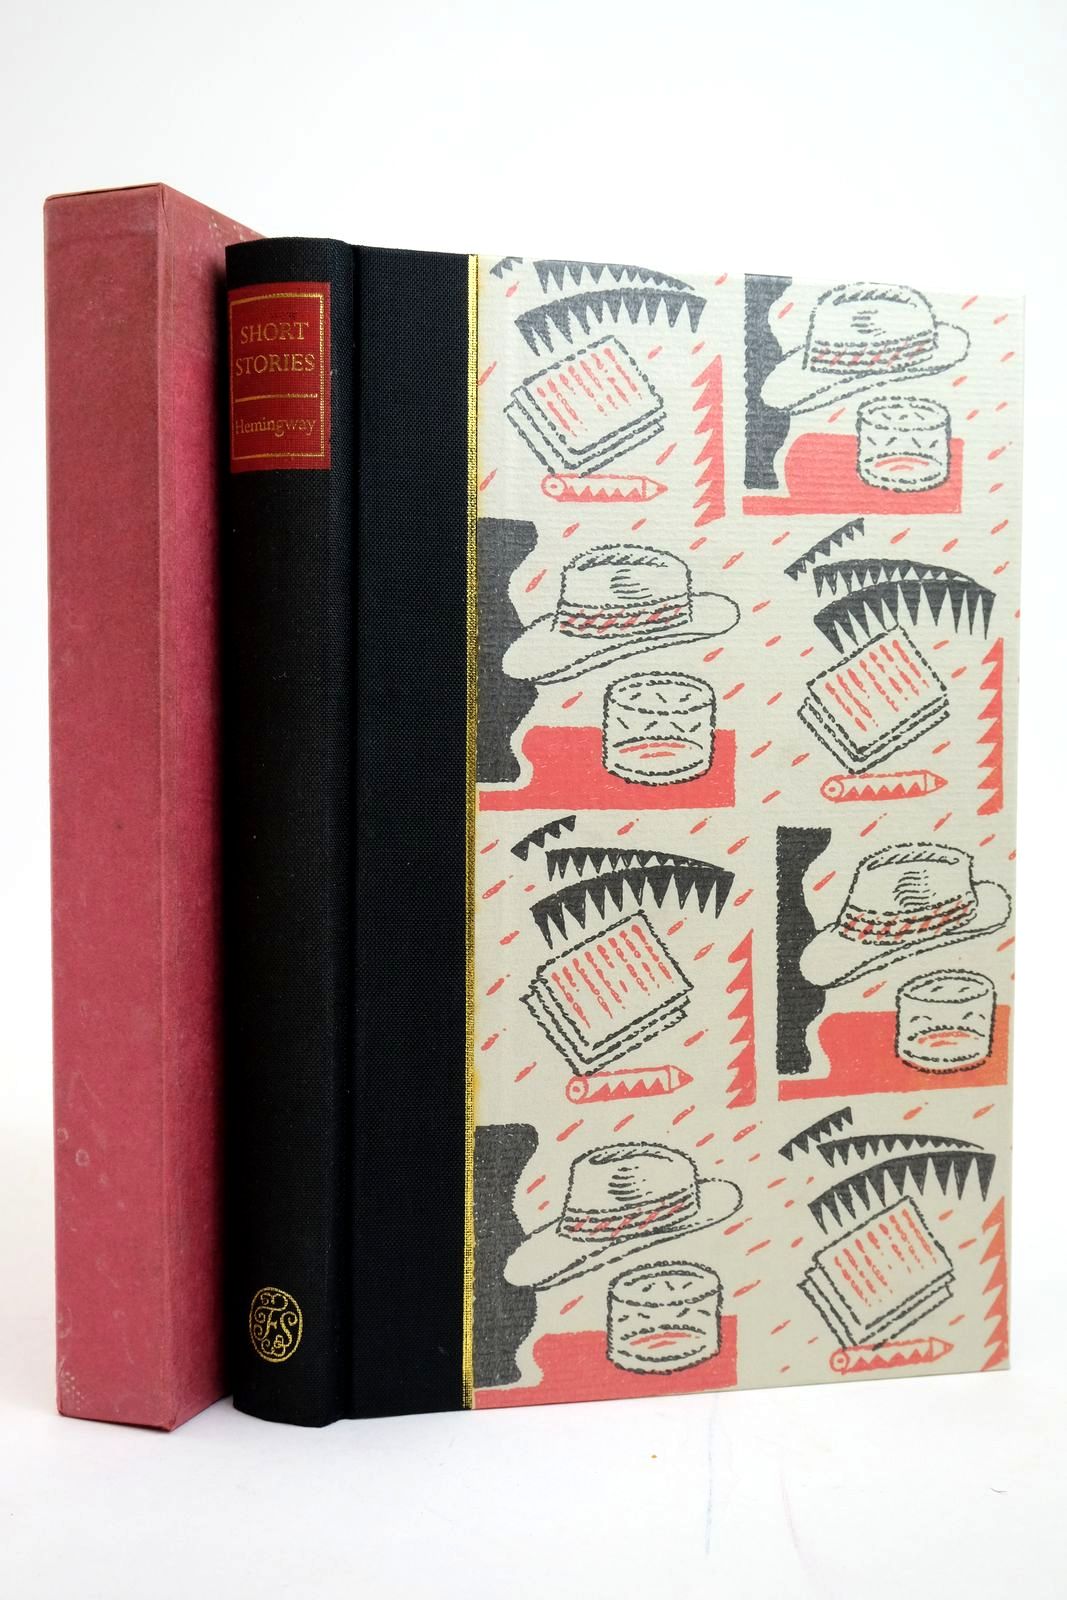 Photo of SHORT STORIES written by Hemingway, Ernest Hughes, David illustrated by Beck, Ian published by Folio Society (STOCK CODE: 2135147)  for sale by Stella & Rose's Books